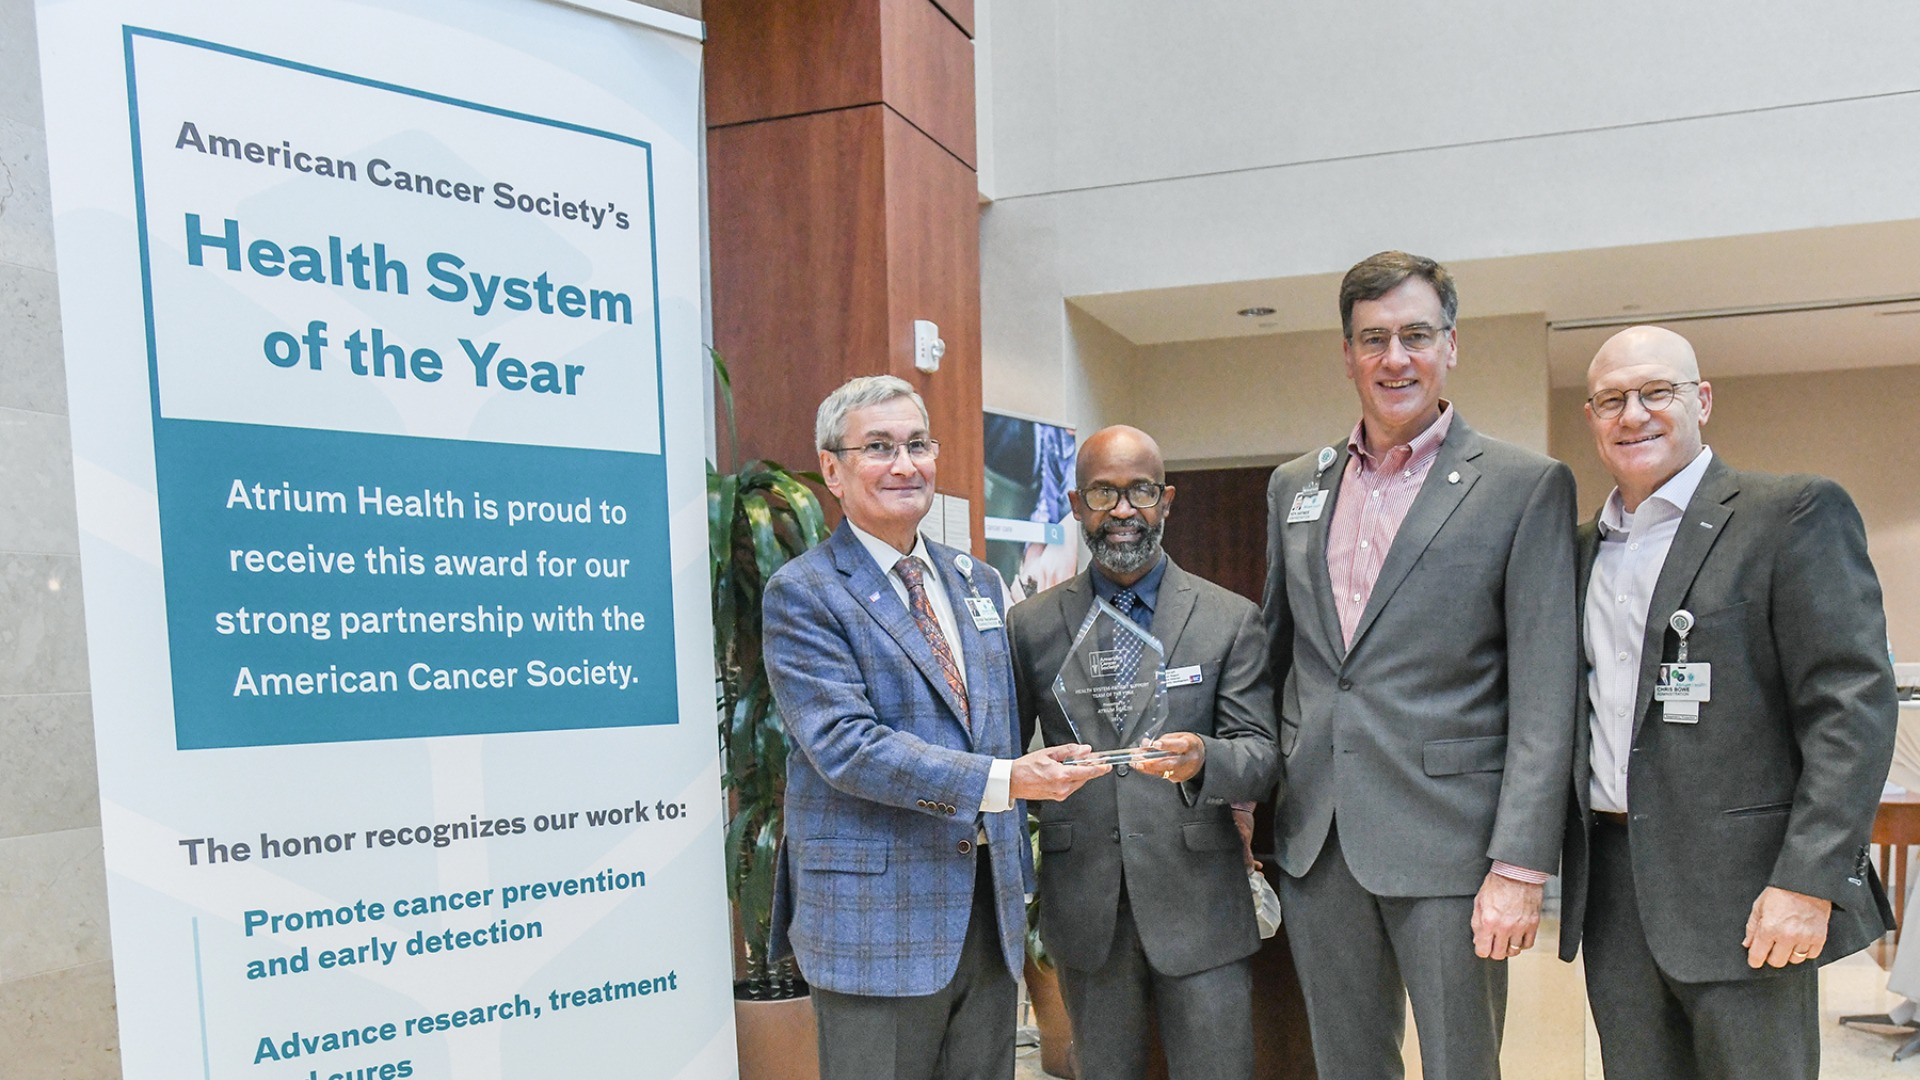 American Cancer Society Honors Atrium Health with its Inaugural Health System of the Year Award